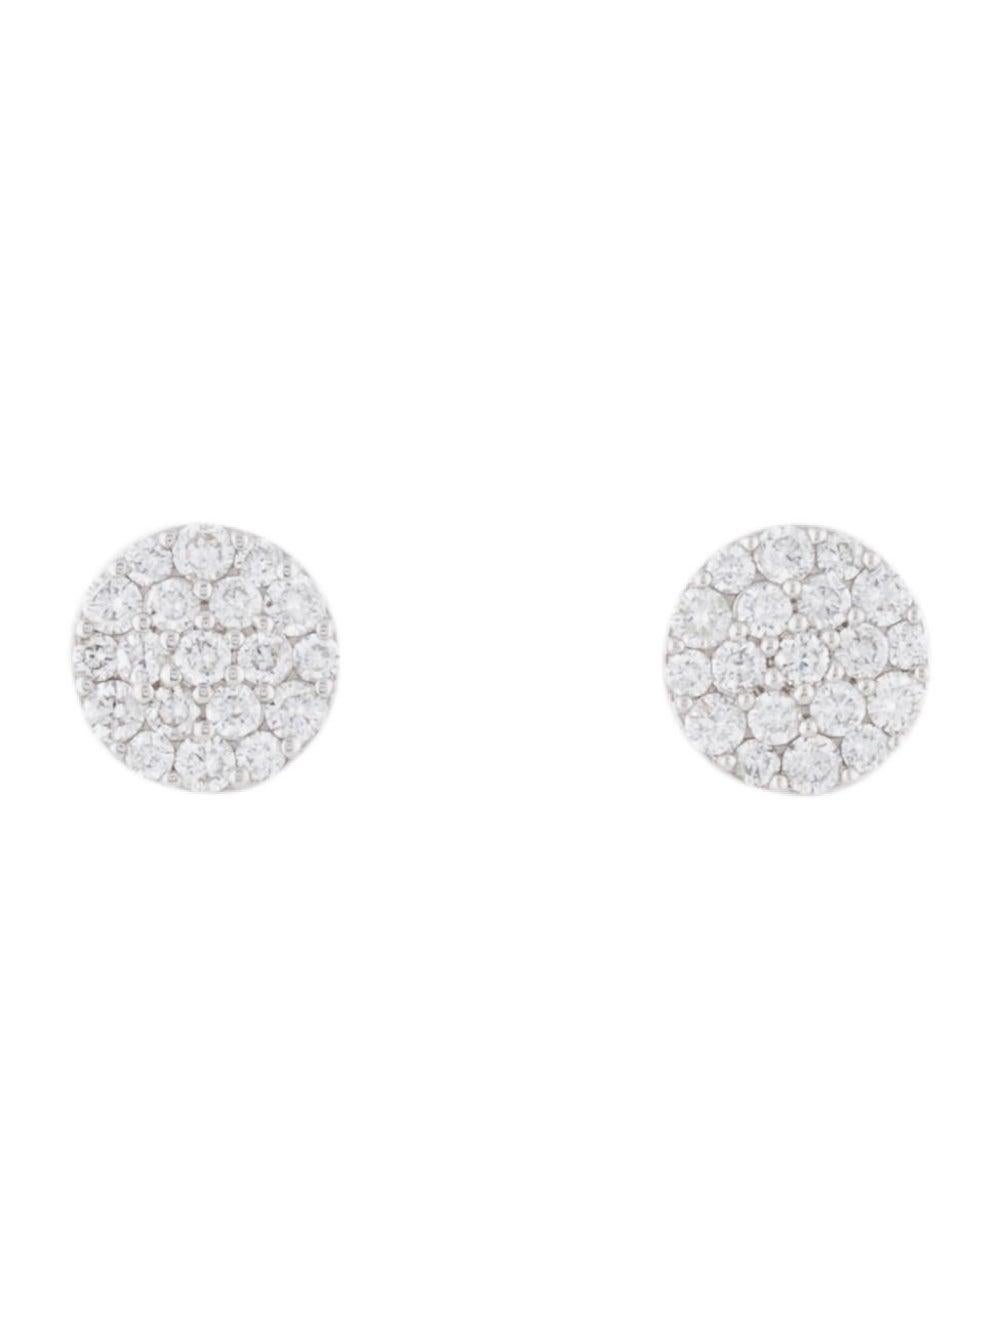 Contemporary 14K White Gold Diamond Cluster Stud Earrings for Her For Sale